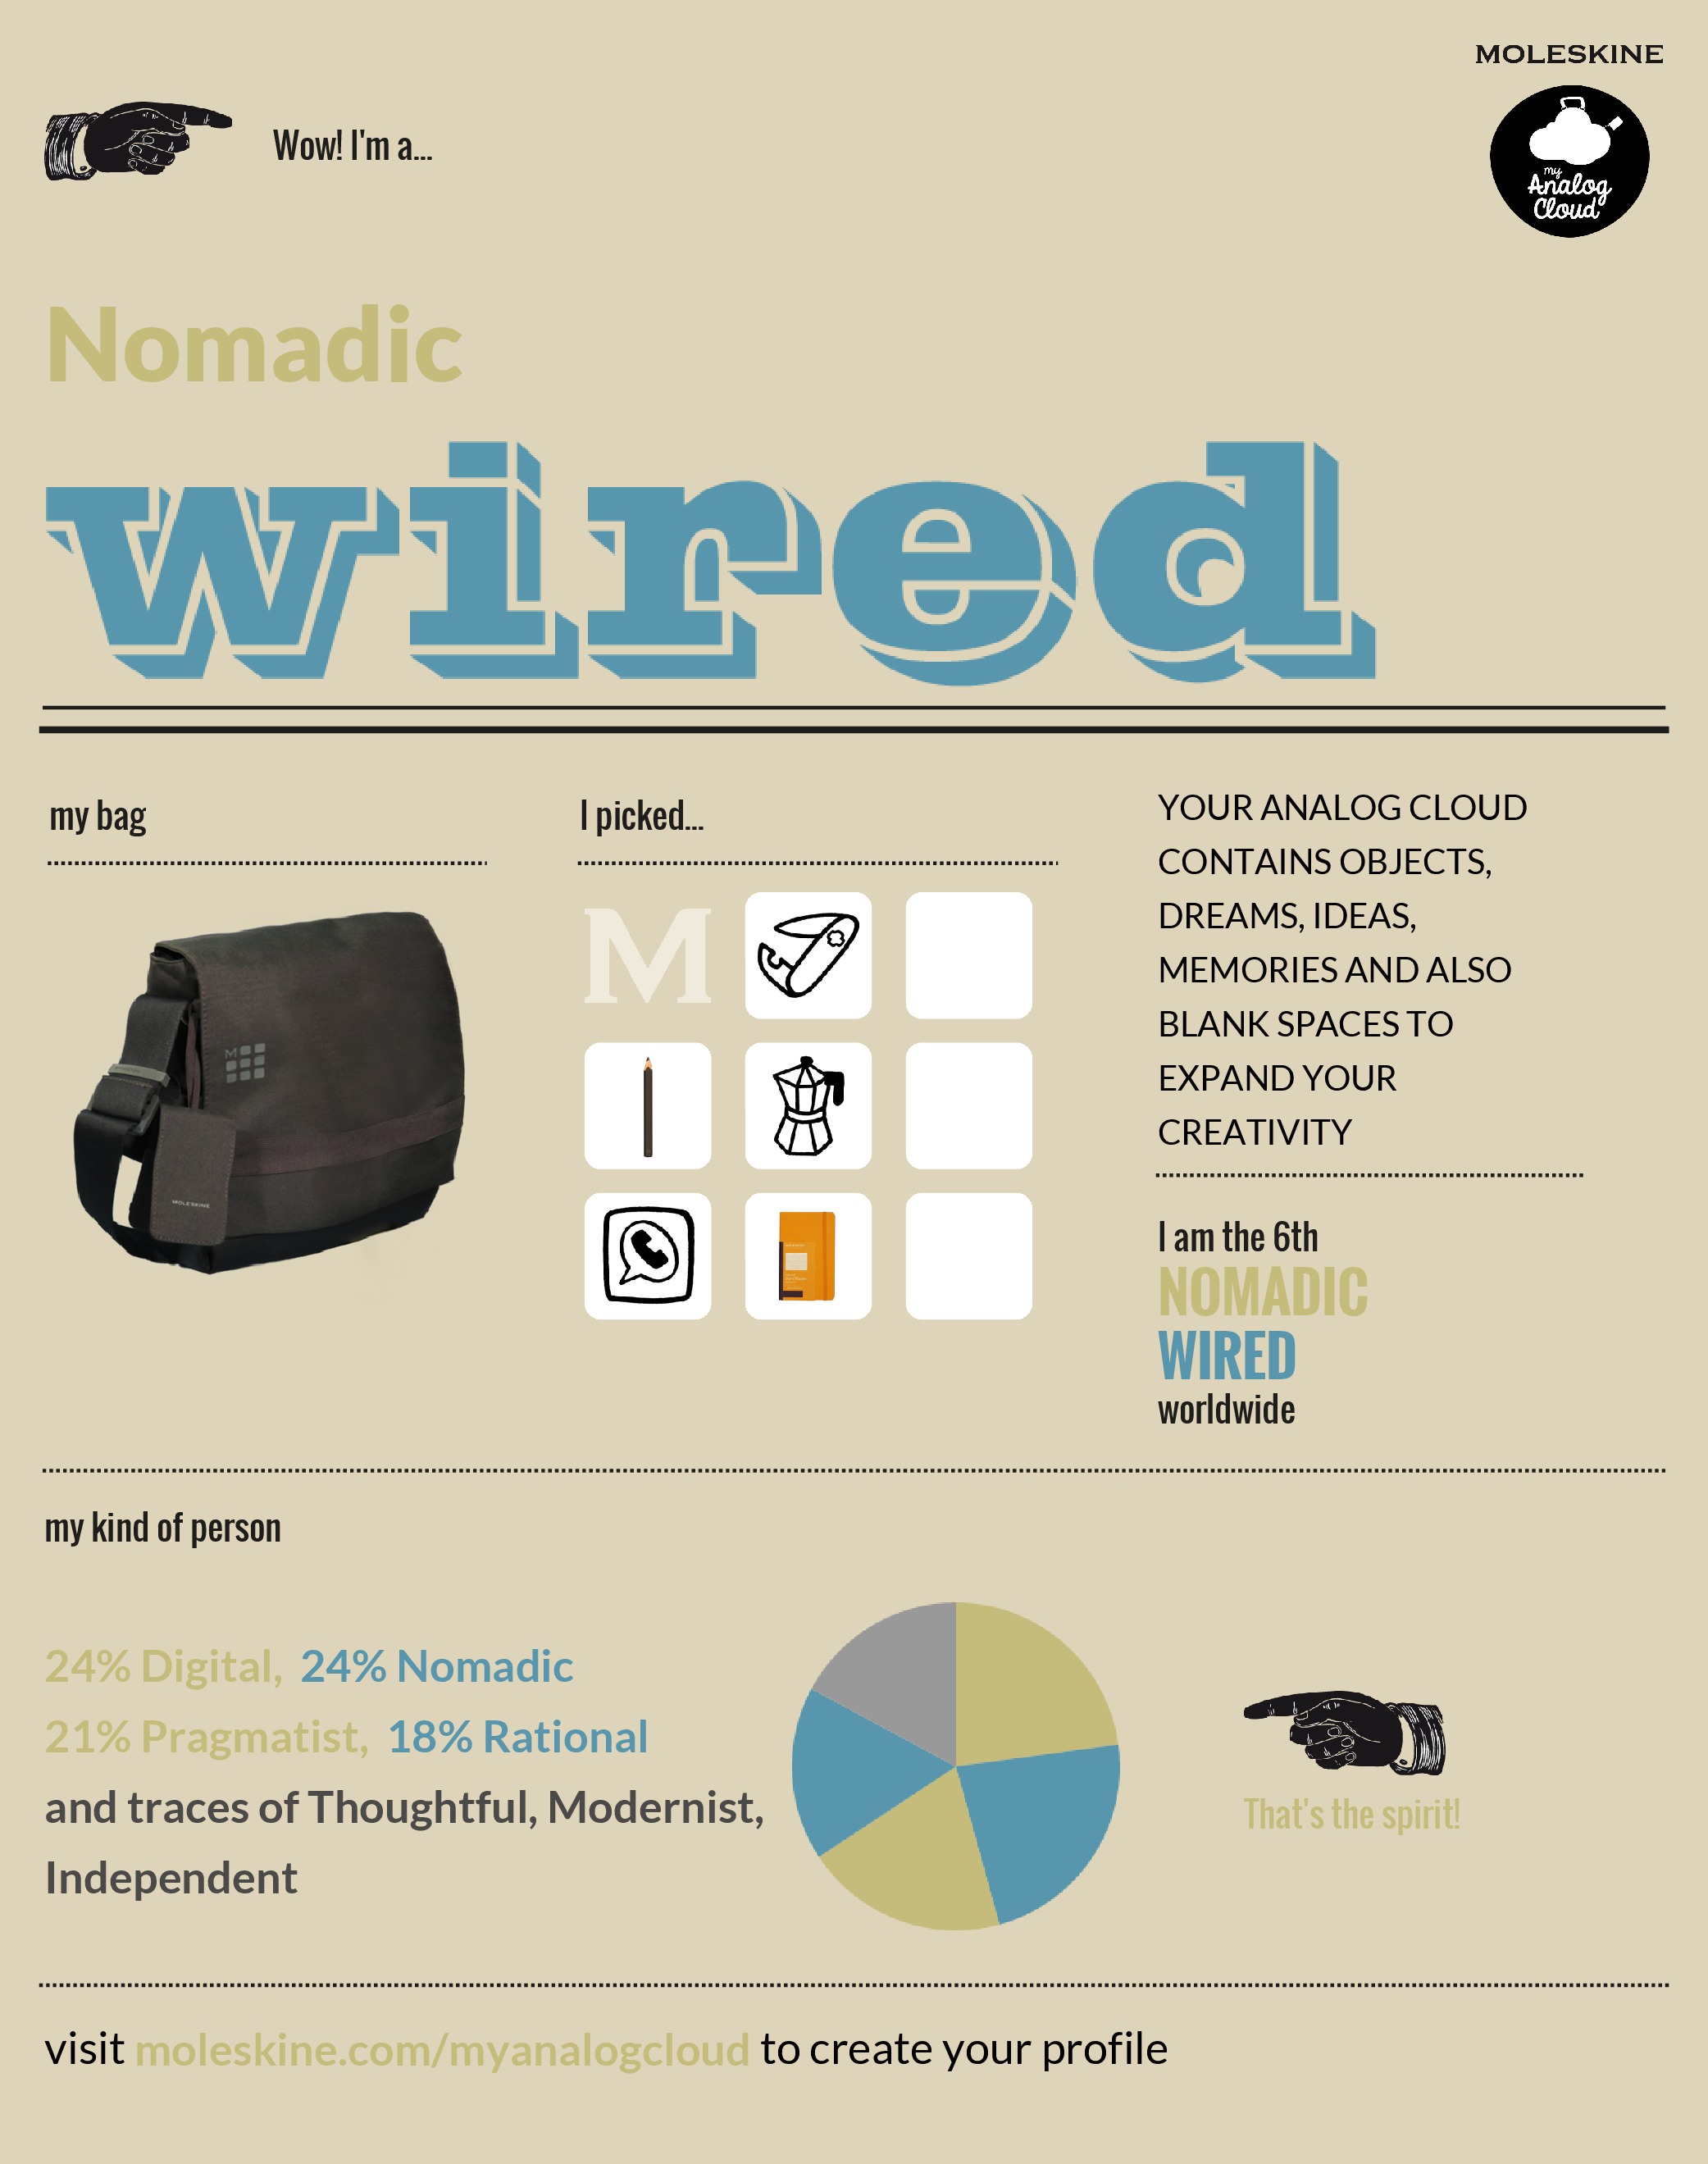 in this day an age, it’s hard not to be a nomadic wired person don’t you think?